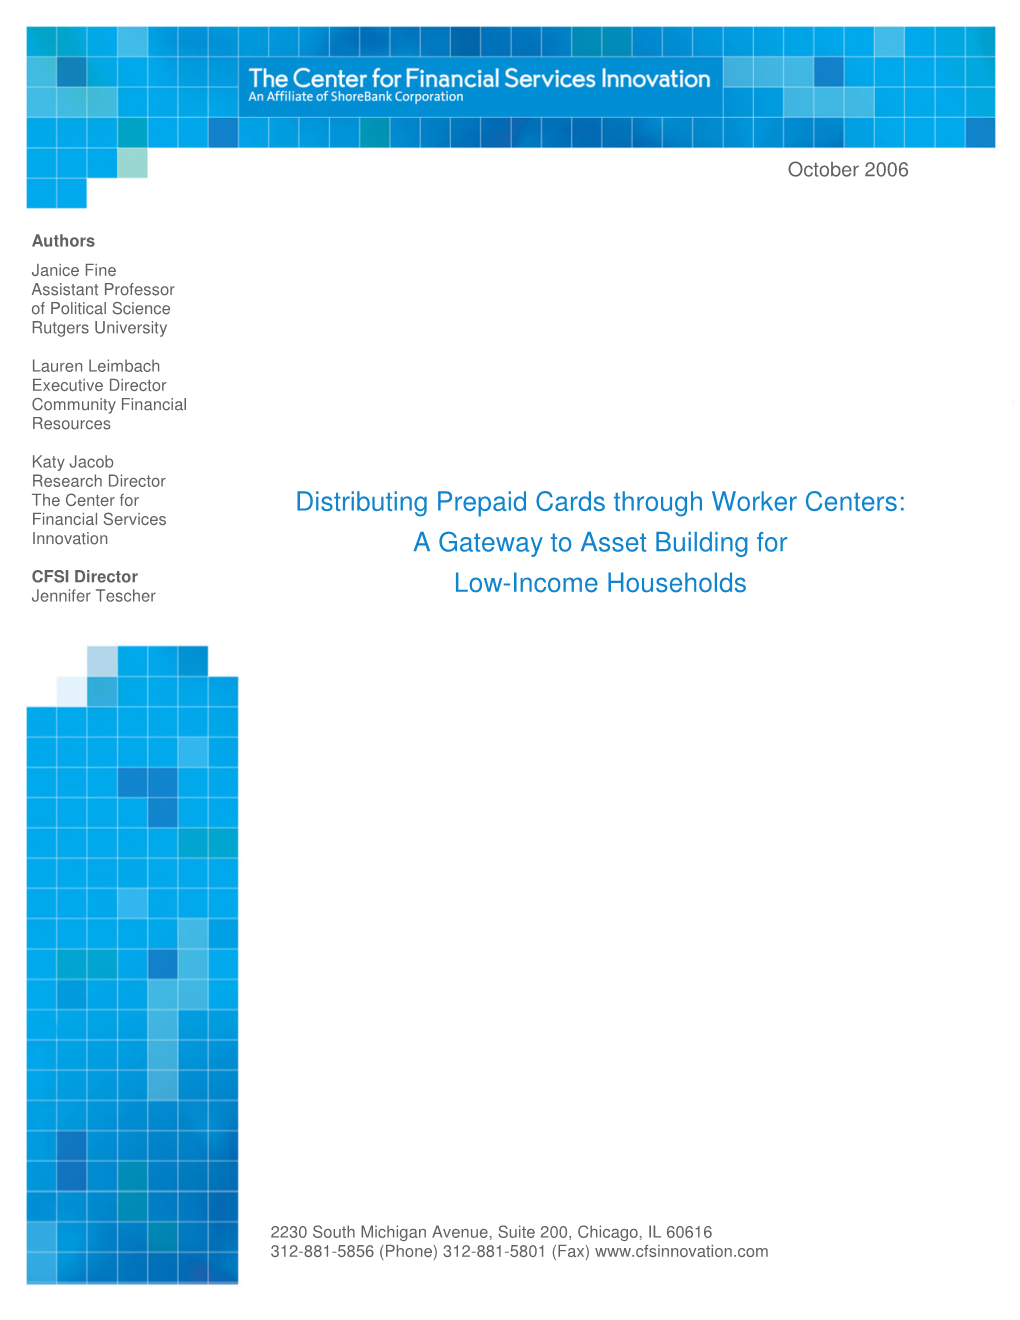 Distributing Prepaid Cards Through Worker Centers: a Gateway To